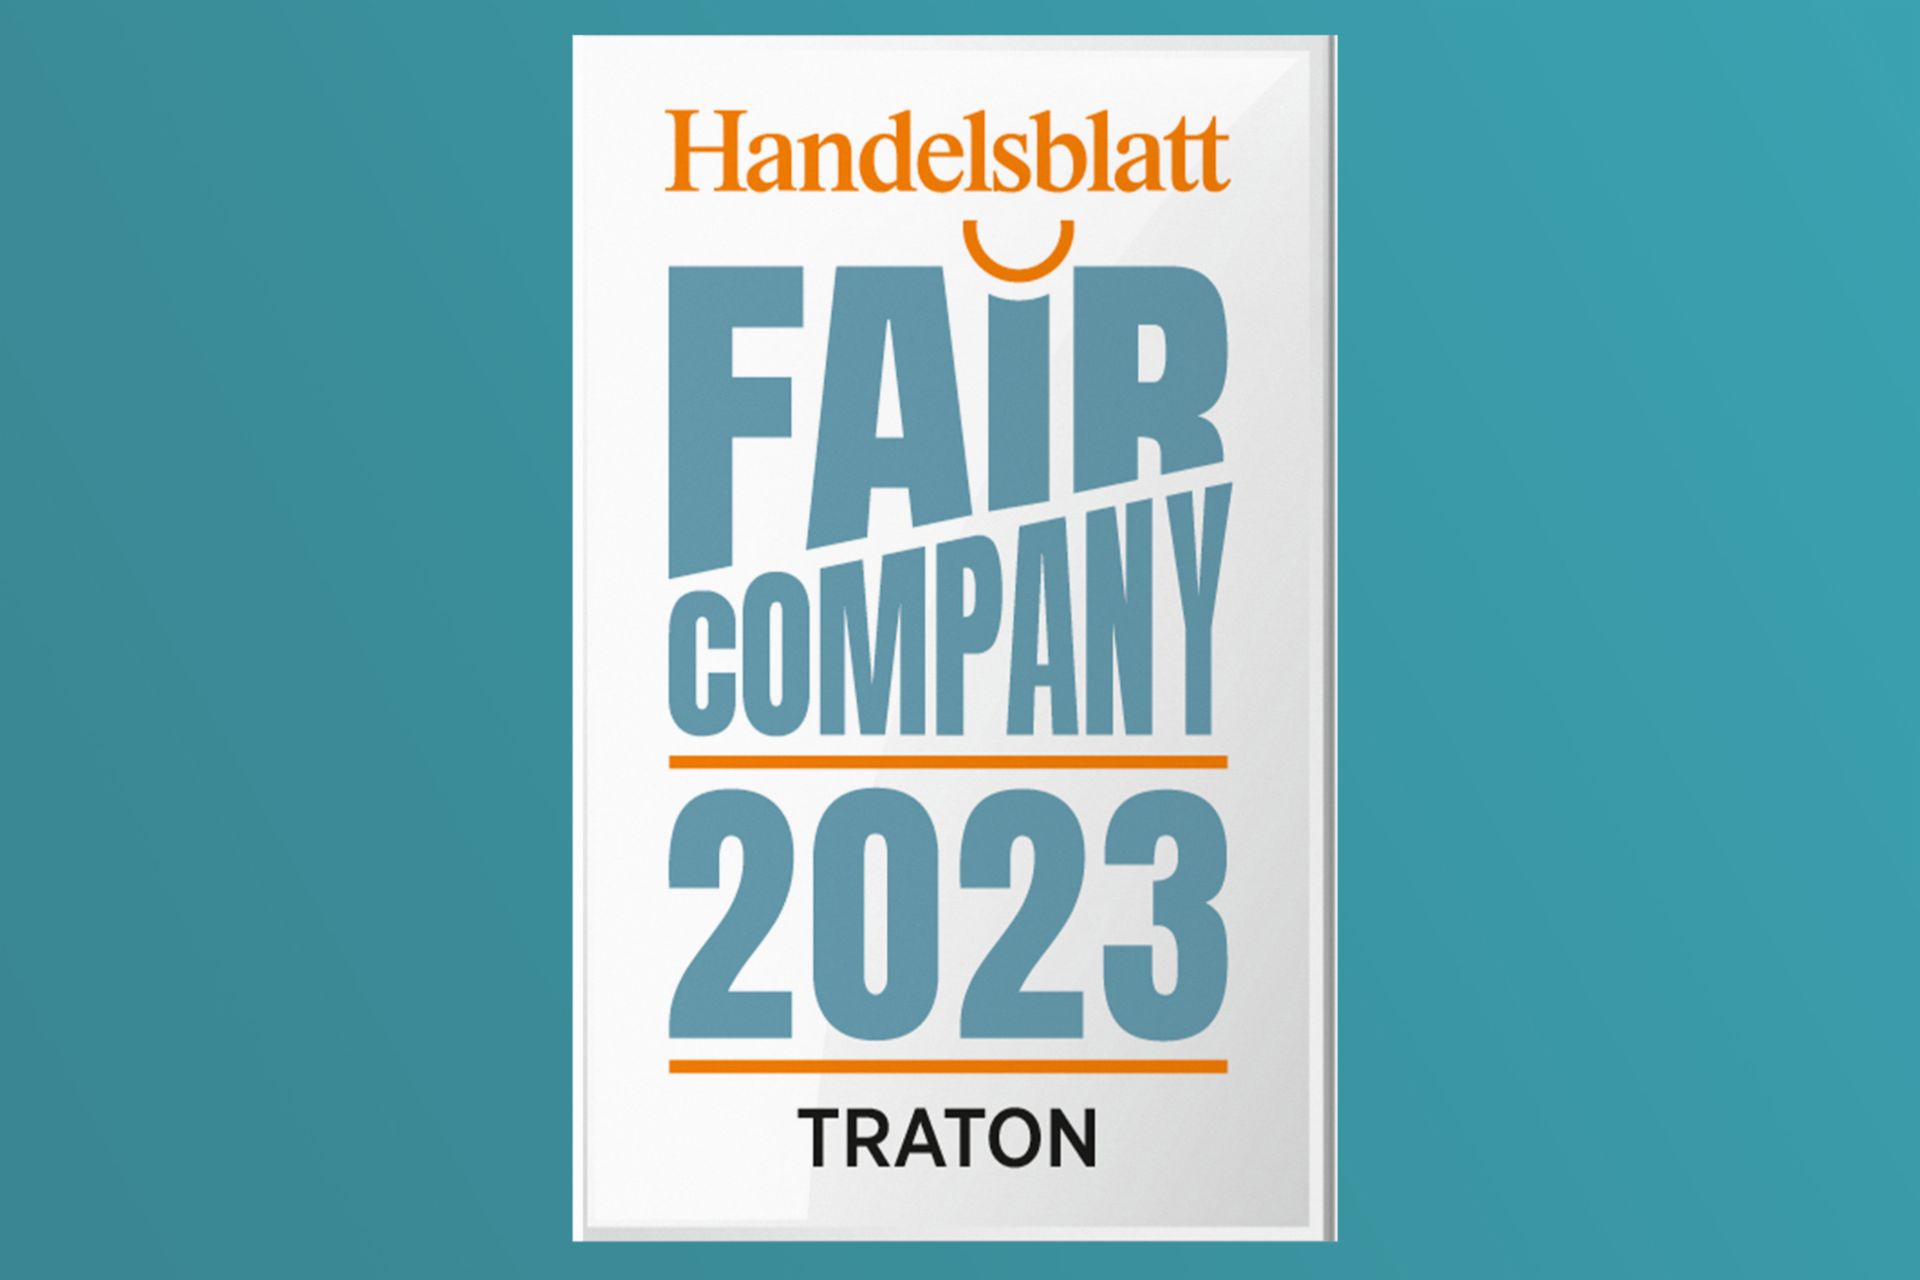 Awarded by Handelsblatt and the Institute for Employment and Employability: As a Fair Company, TRATON meets the expectations and values of career starters and young professionals in a special way and offers a fair, attractive working environment.